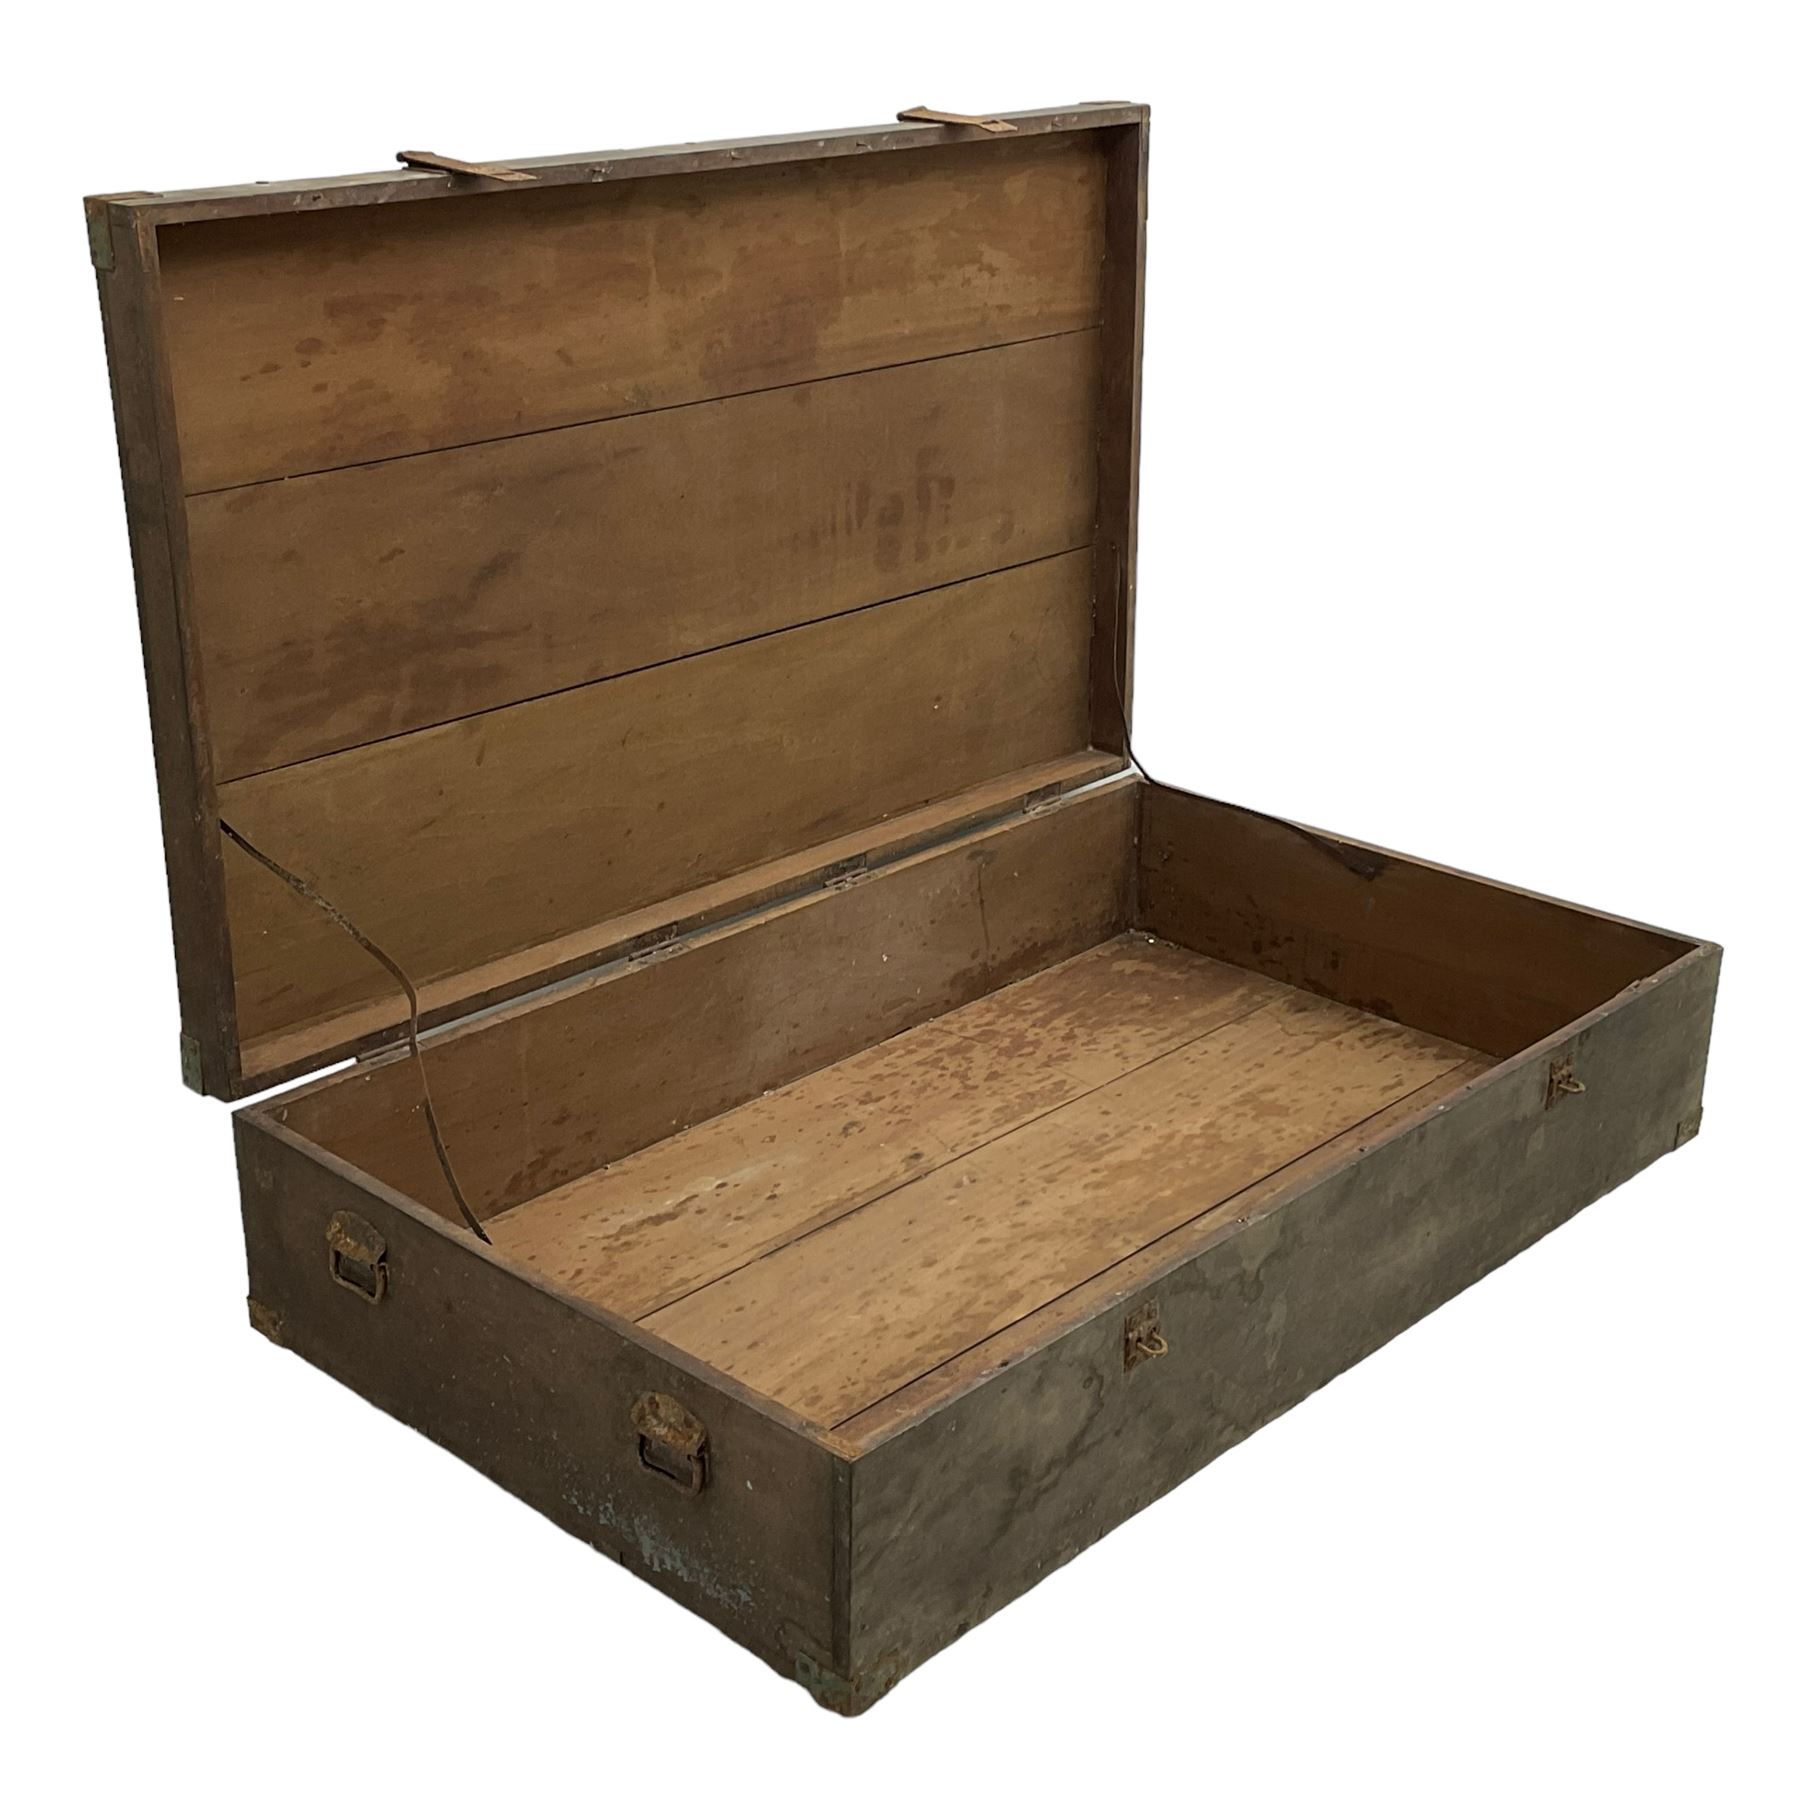 Large 19th century wooden touring trunk - Image 2 of 7